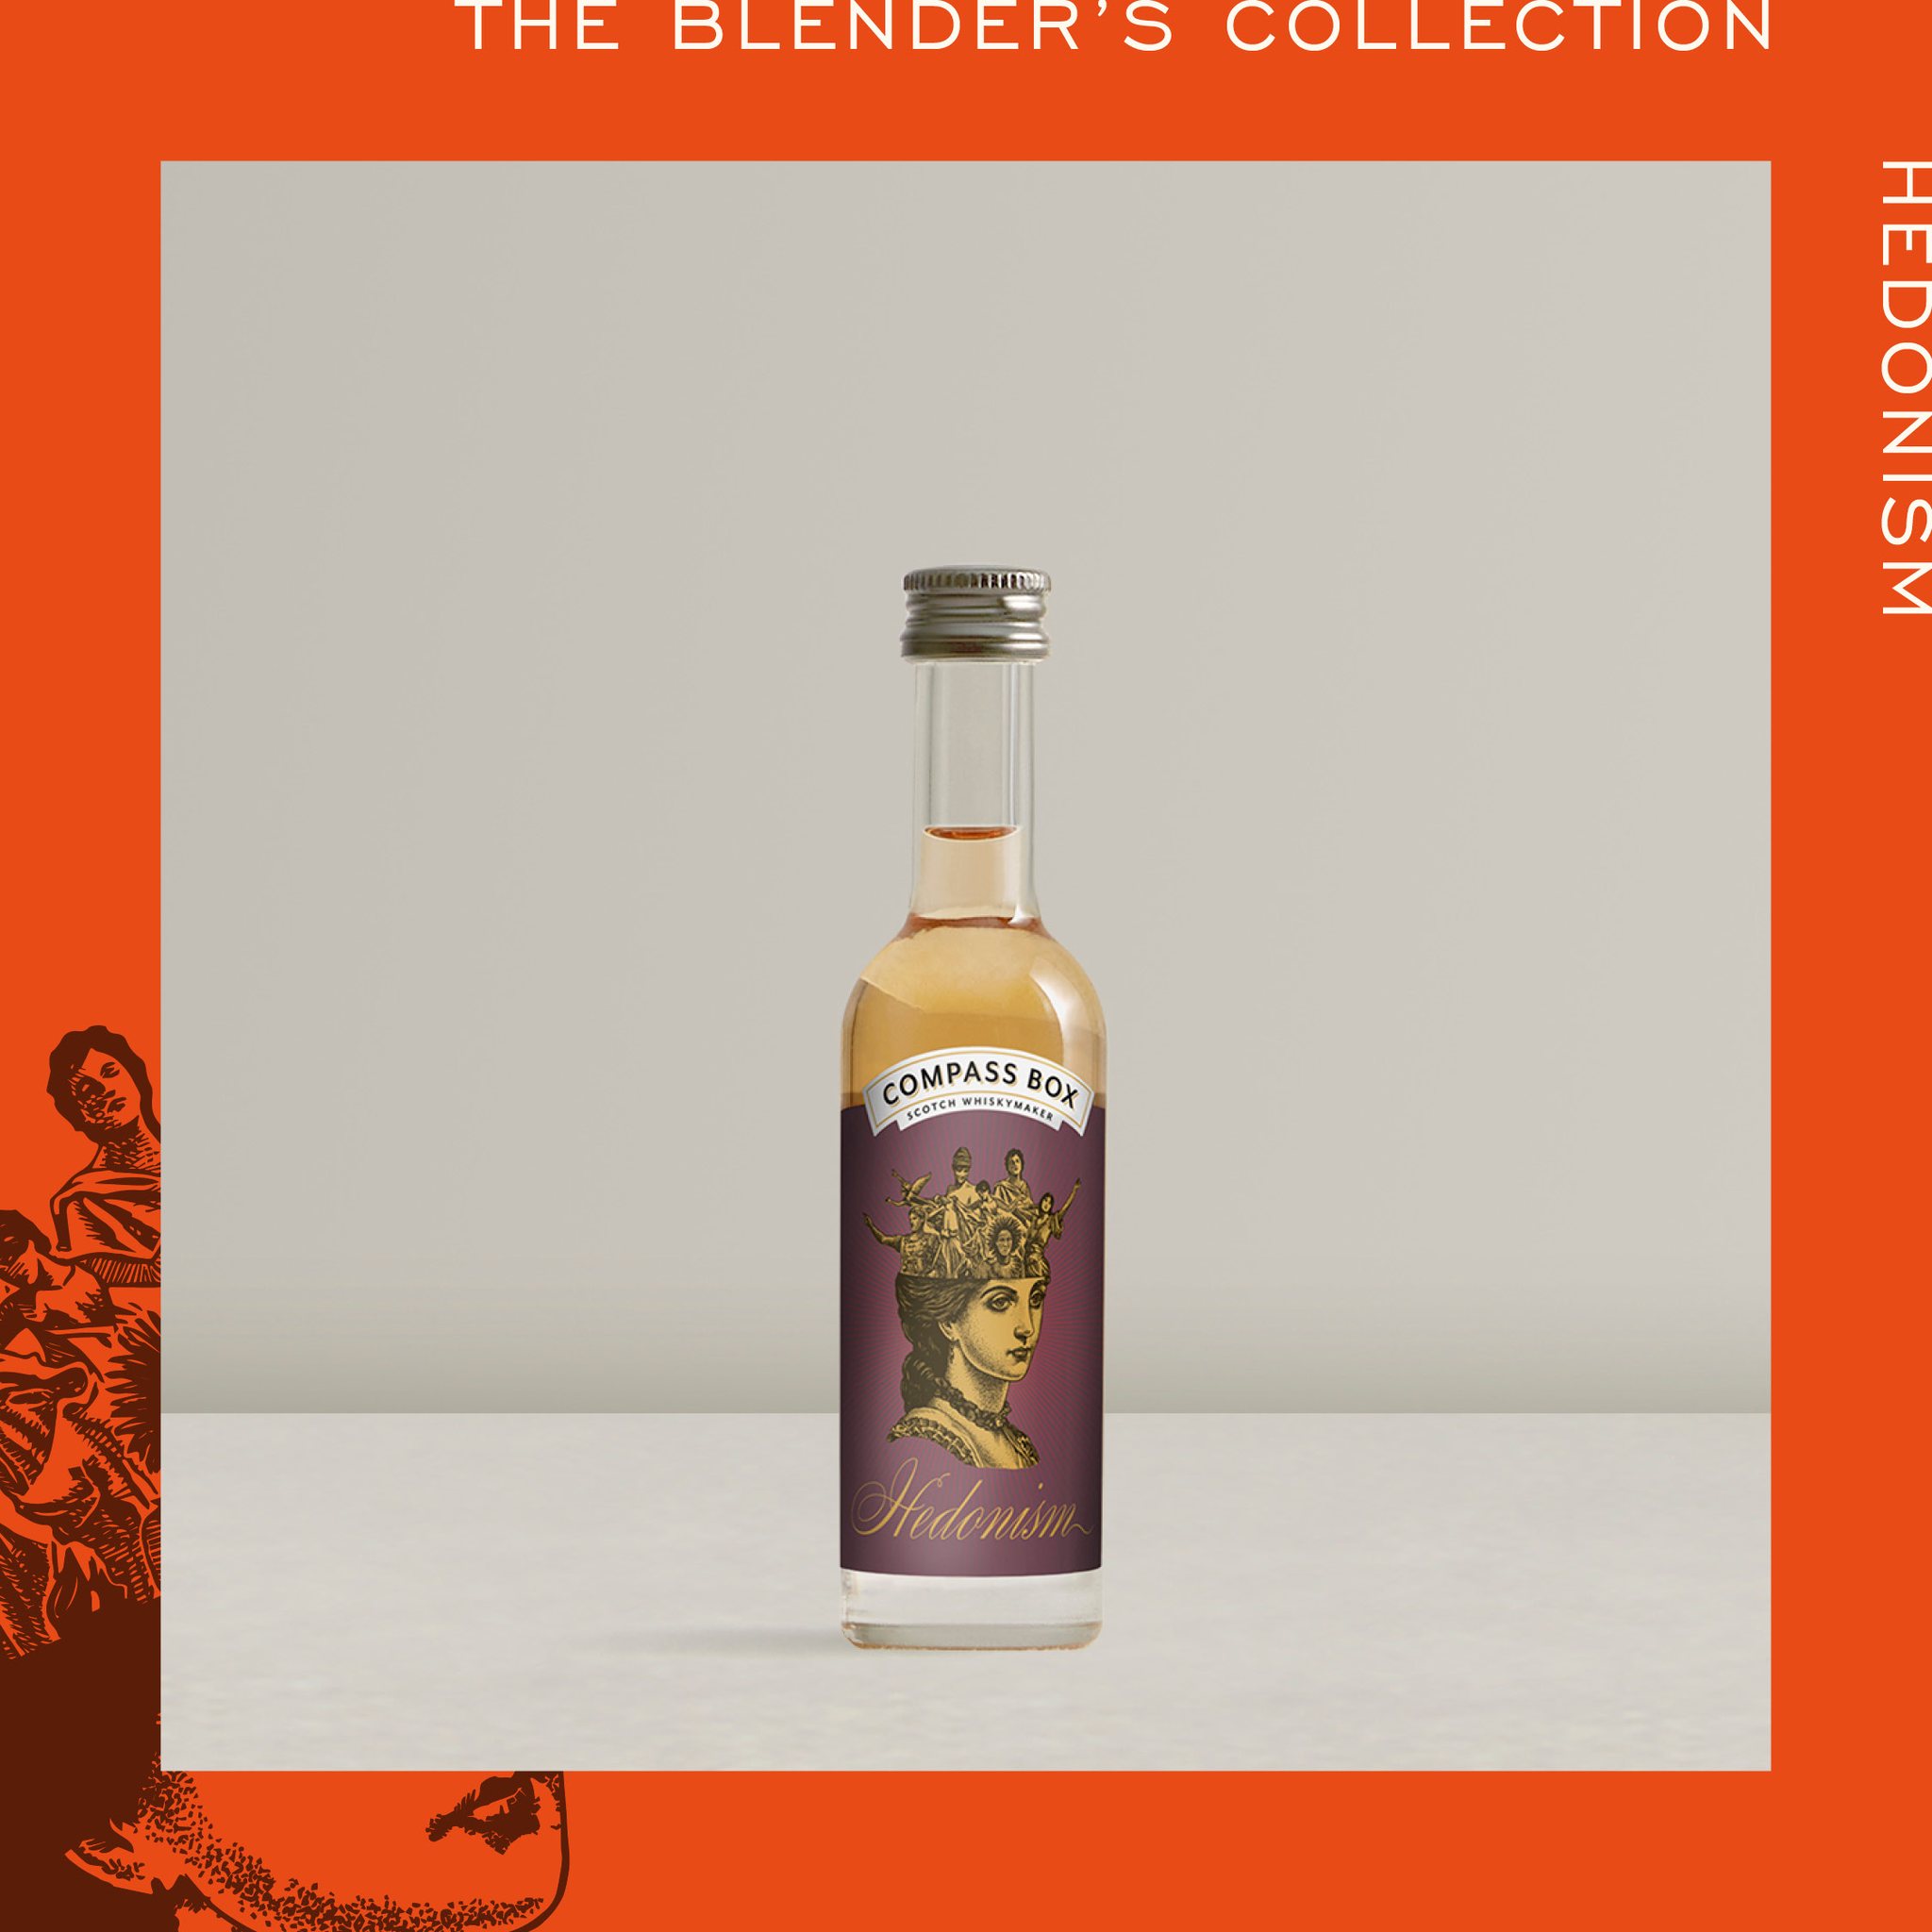 orchard house Compass Box The Blenders Collection